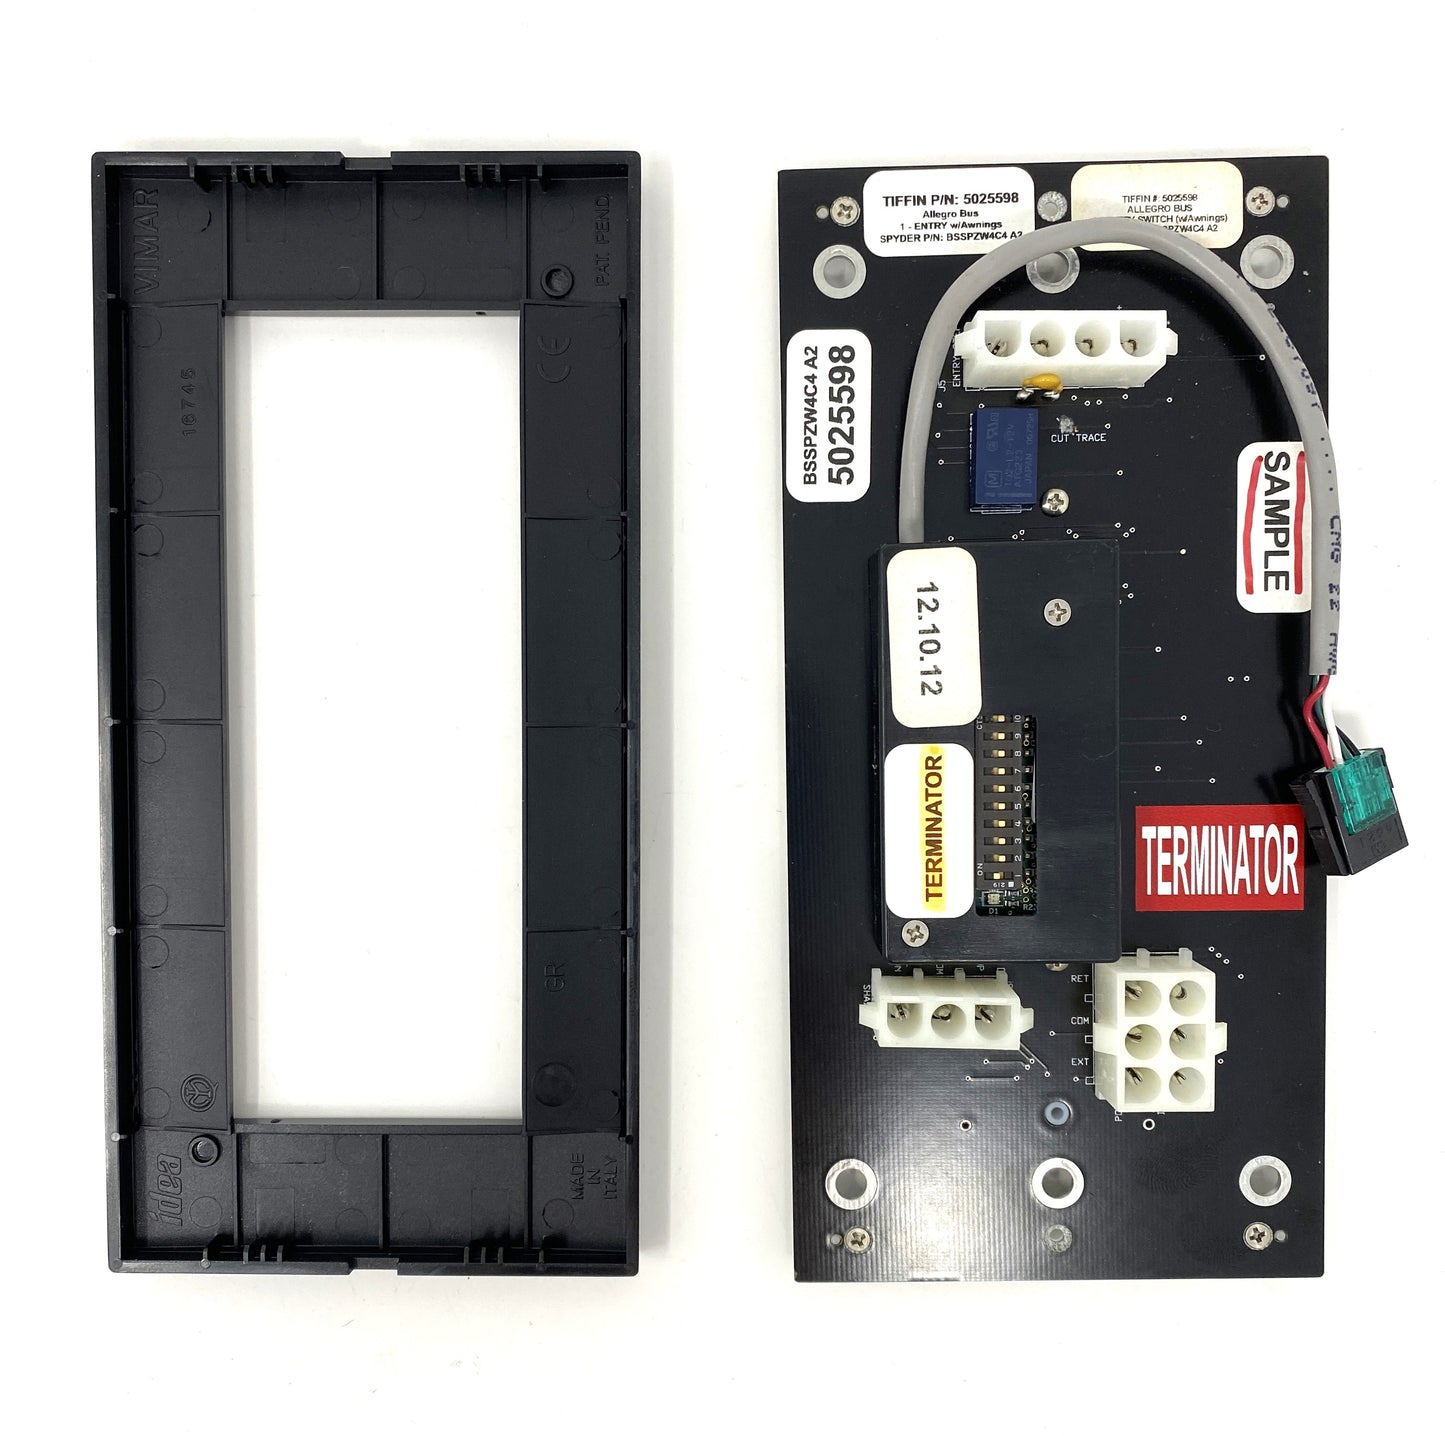 5025598 BSSPZW4C4 C(A2) - Sw Panel Assy, SSP14, 10 Pos., Tiffin - Allegro Bus, Z, ENTRY w/ AWNING BUTTONS - Horizontal